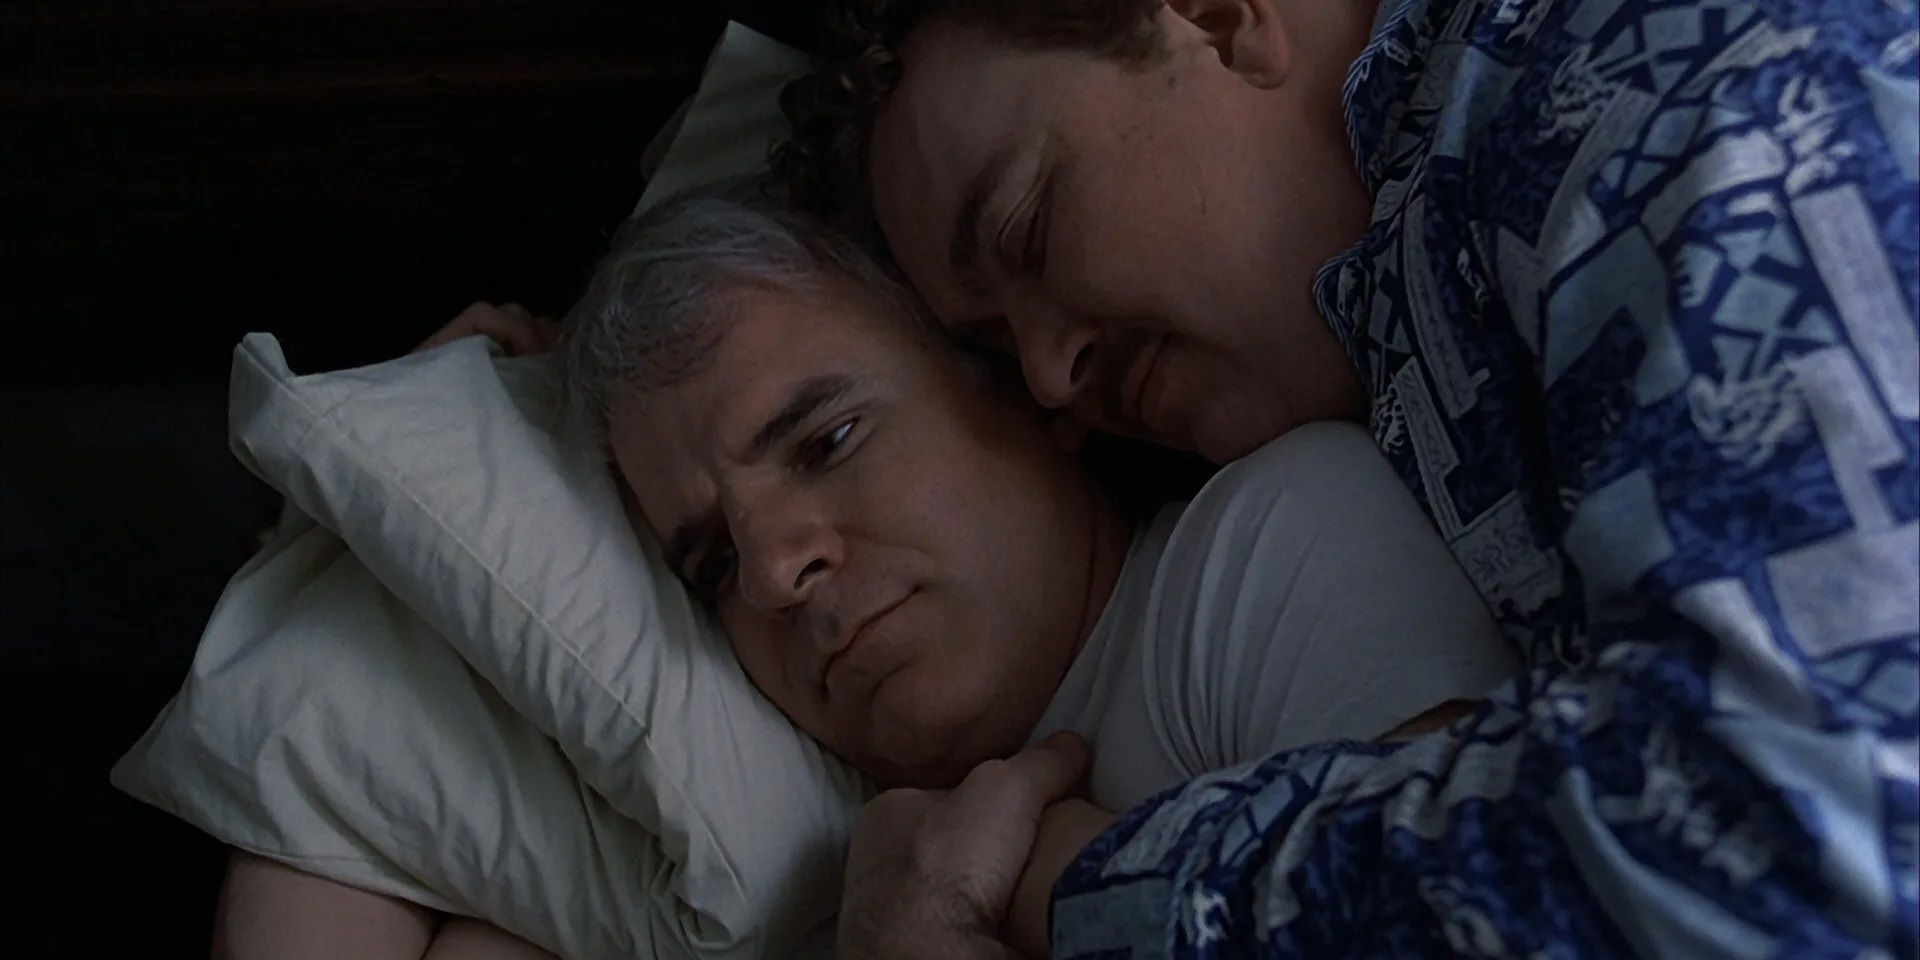 Del and Neal sharing a bed in Planes, Trains and Automobiles